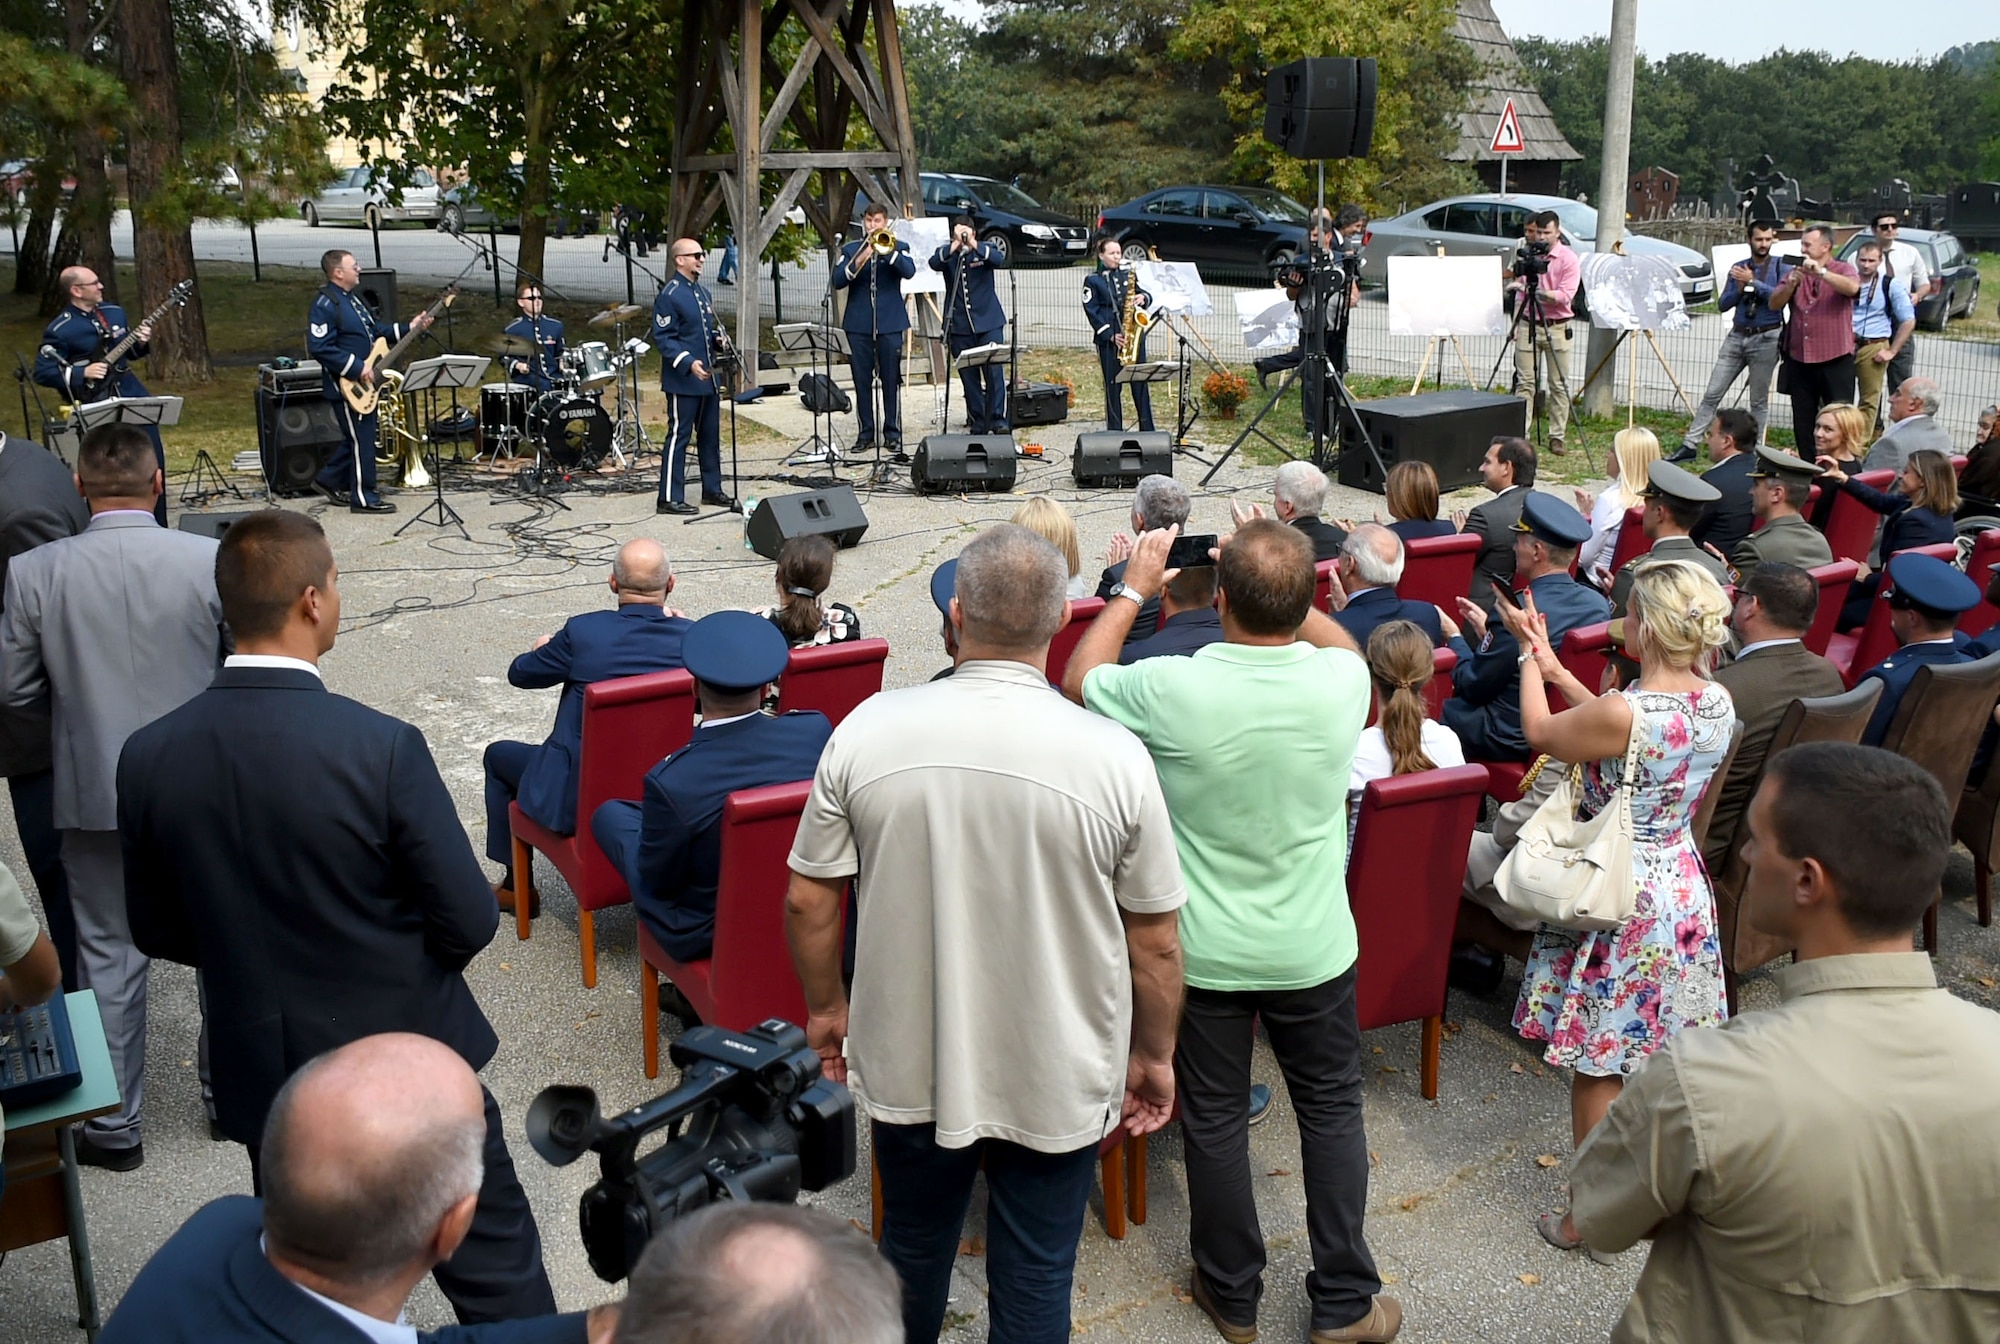 U.S. Air Forces in Europe Band performs outside the school in Pranjani, Serbia, Sept. 22, 2018, for the Halyard Mission Commemoration. The Halyard Mission was one of the largest evacuations of fallen allied airmen in occupied Europe during WWII. Pranjani and the nearby villages became the main collection center where rescued allied airmen were secretly transferred from all over Serbia. Almost every house in Pranjani hosted several airmen, providing them food and care. (U.S. Air Force photo by TSgt Stephen Ocenosak)